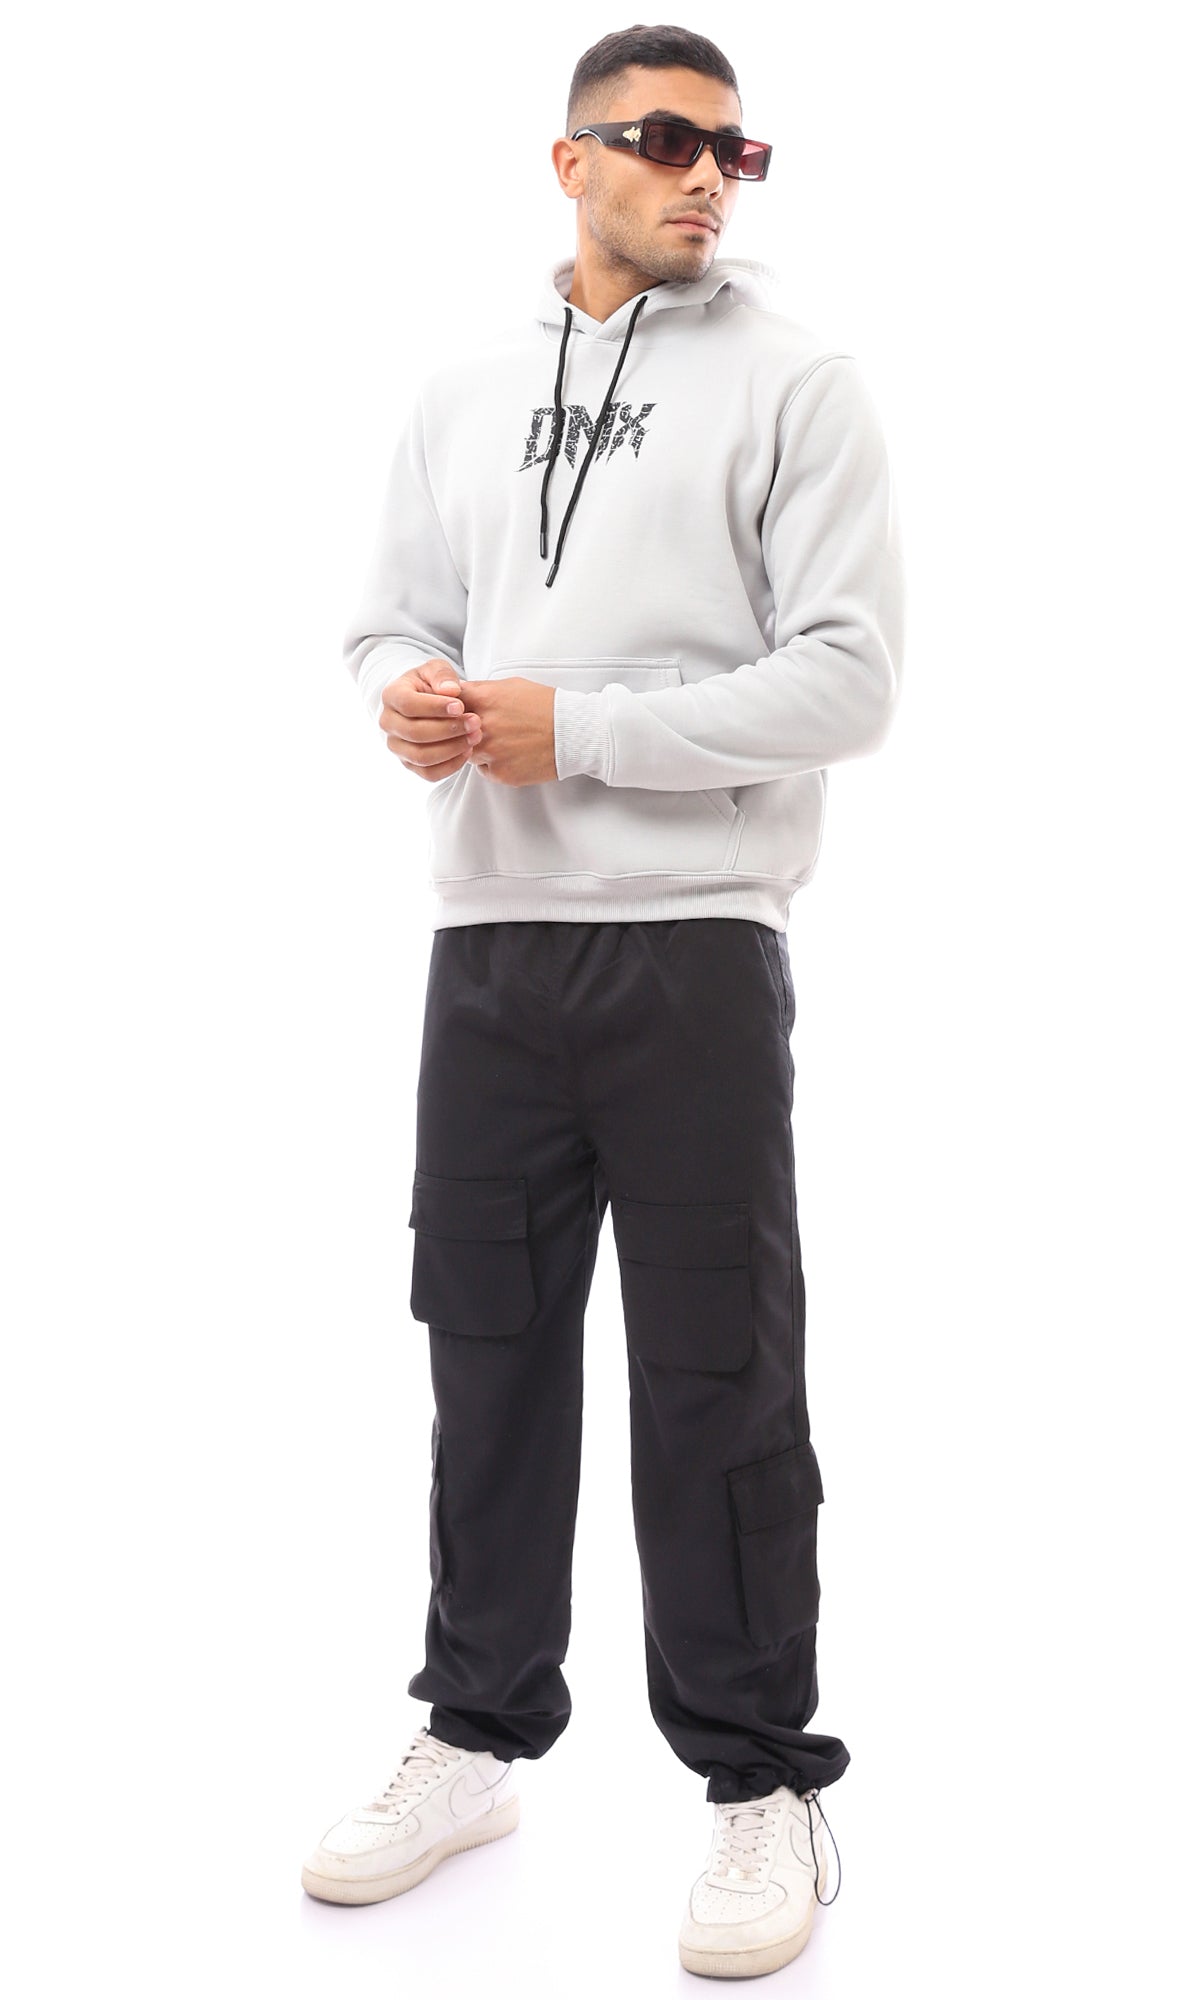 O170578 Black Slip On Solid Cargo Pants With Multi-Pockets